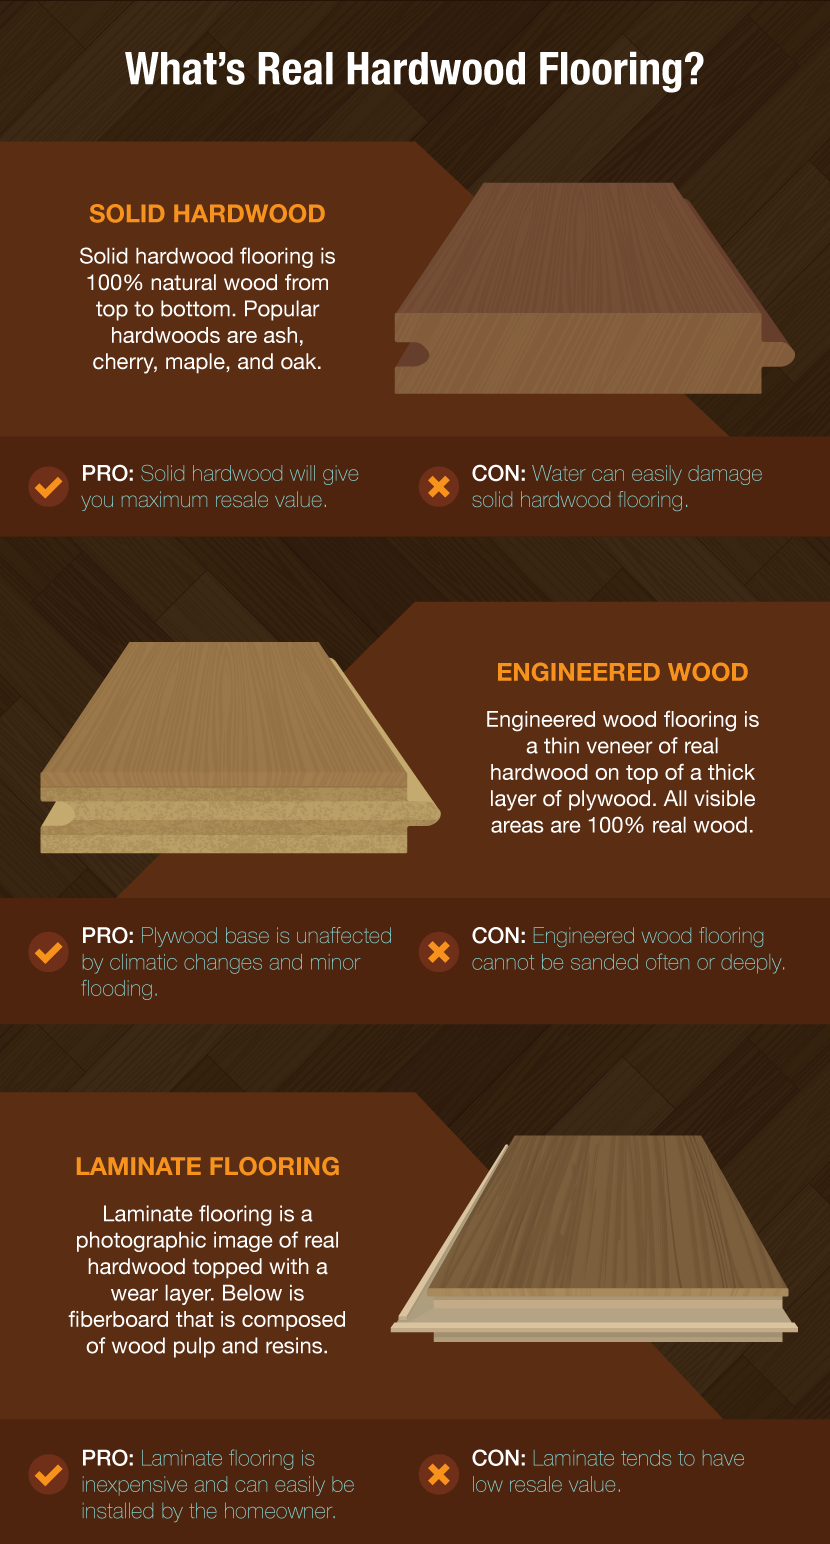 How To Protect Your Hardwood Floors, How To Remove Dog Scratches From Engineered Hardwood Floors